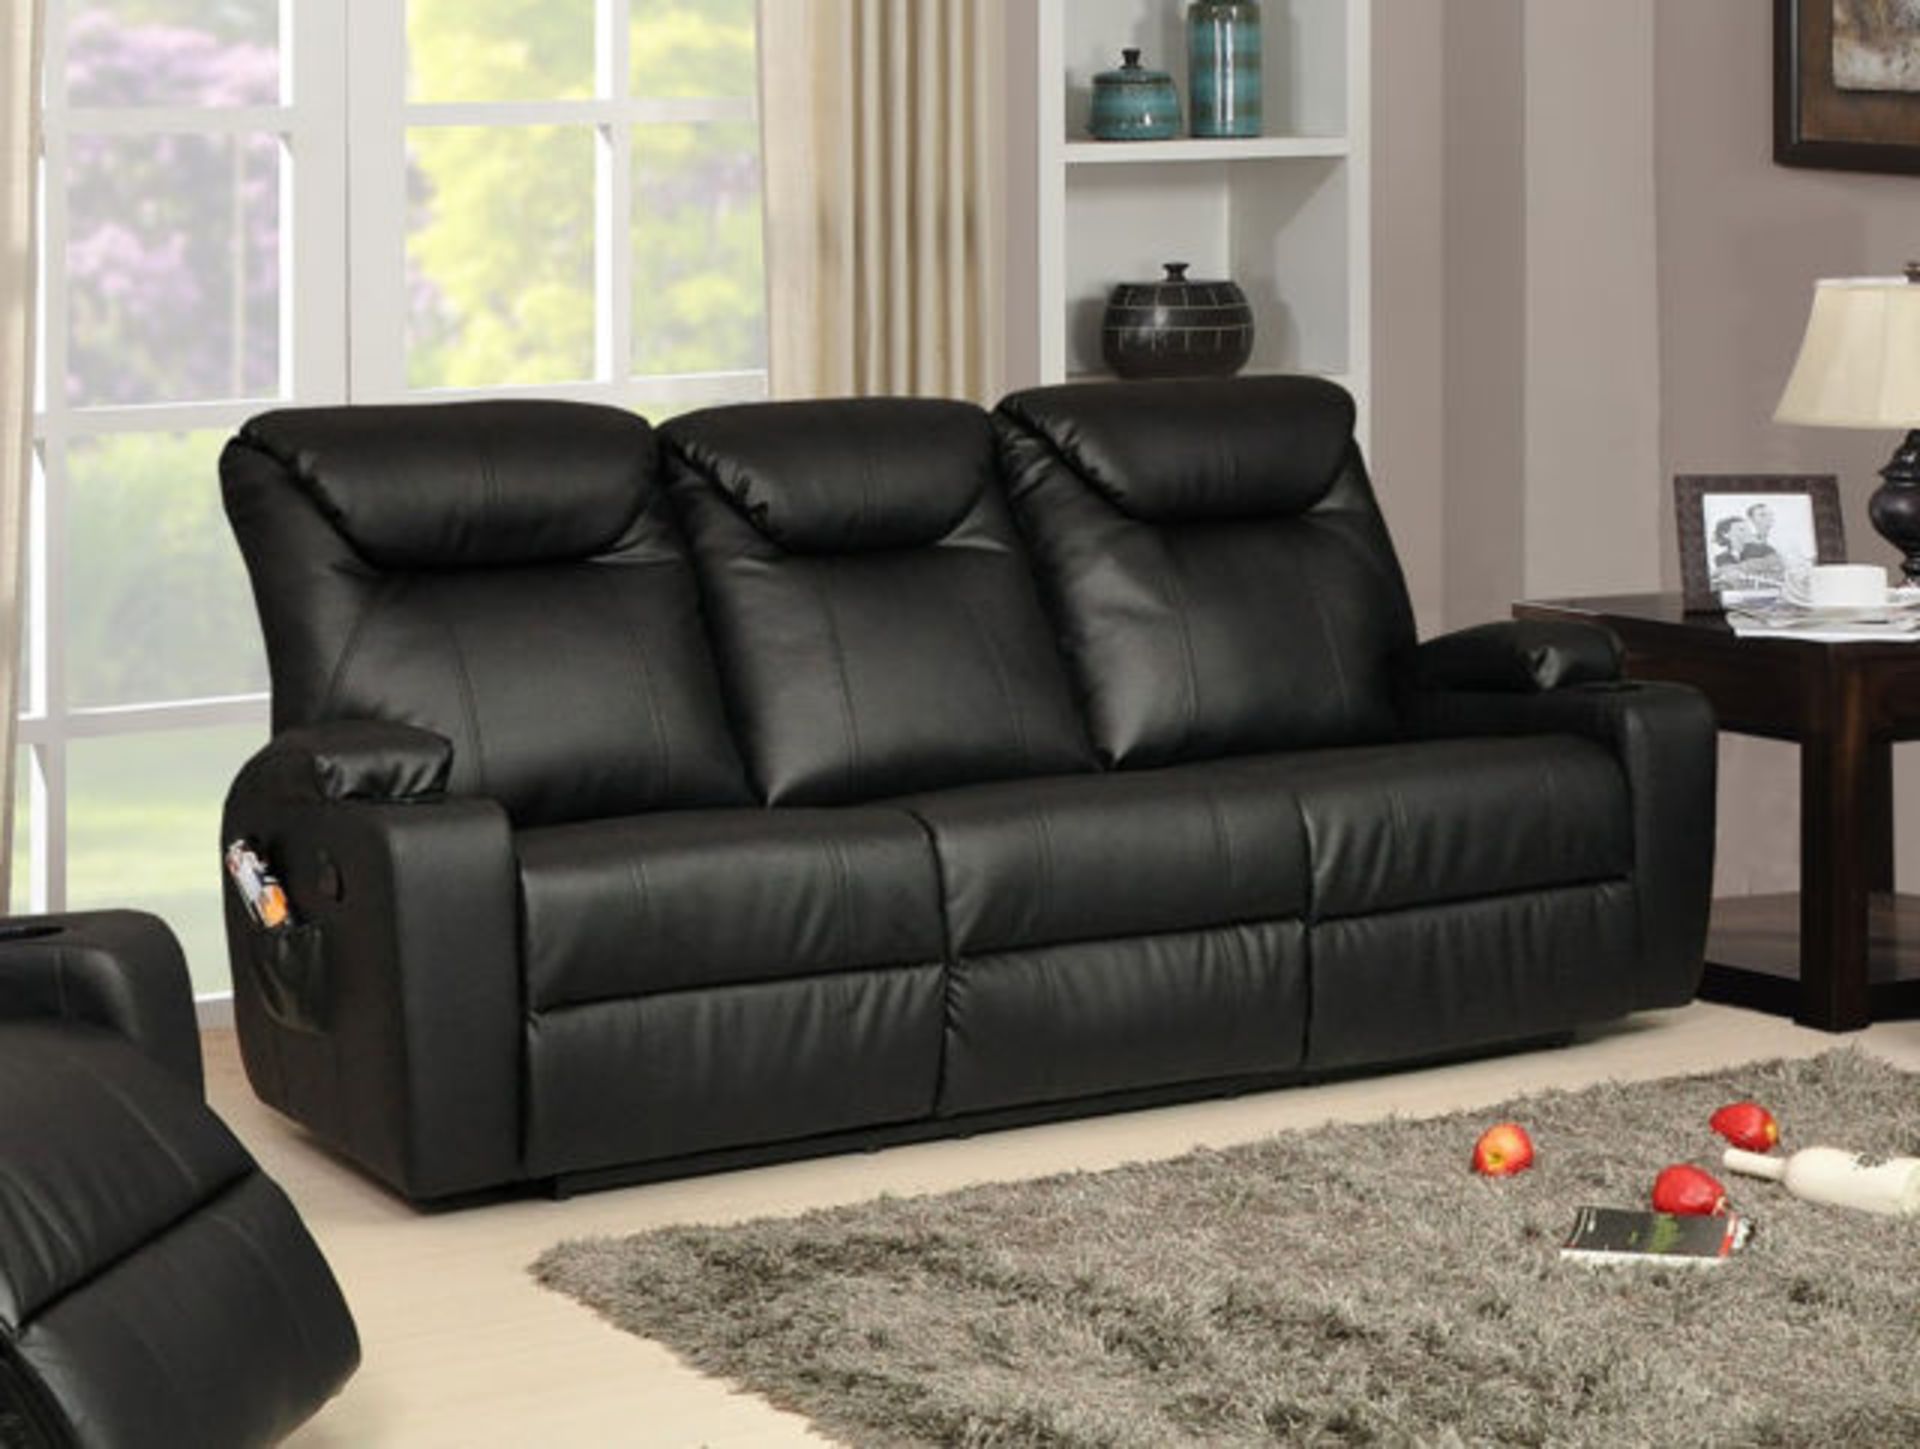 Brand New Boxed 3 Seater Plus 2 Seater Lazyboy Black Leather Manual Reclining Sofas - Image 3 of 3